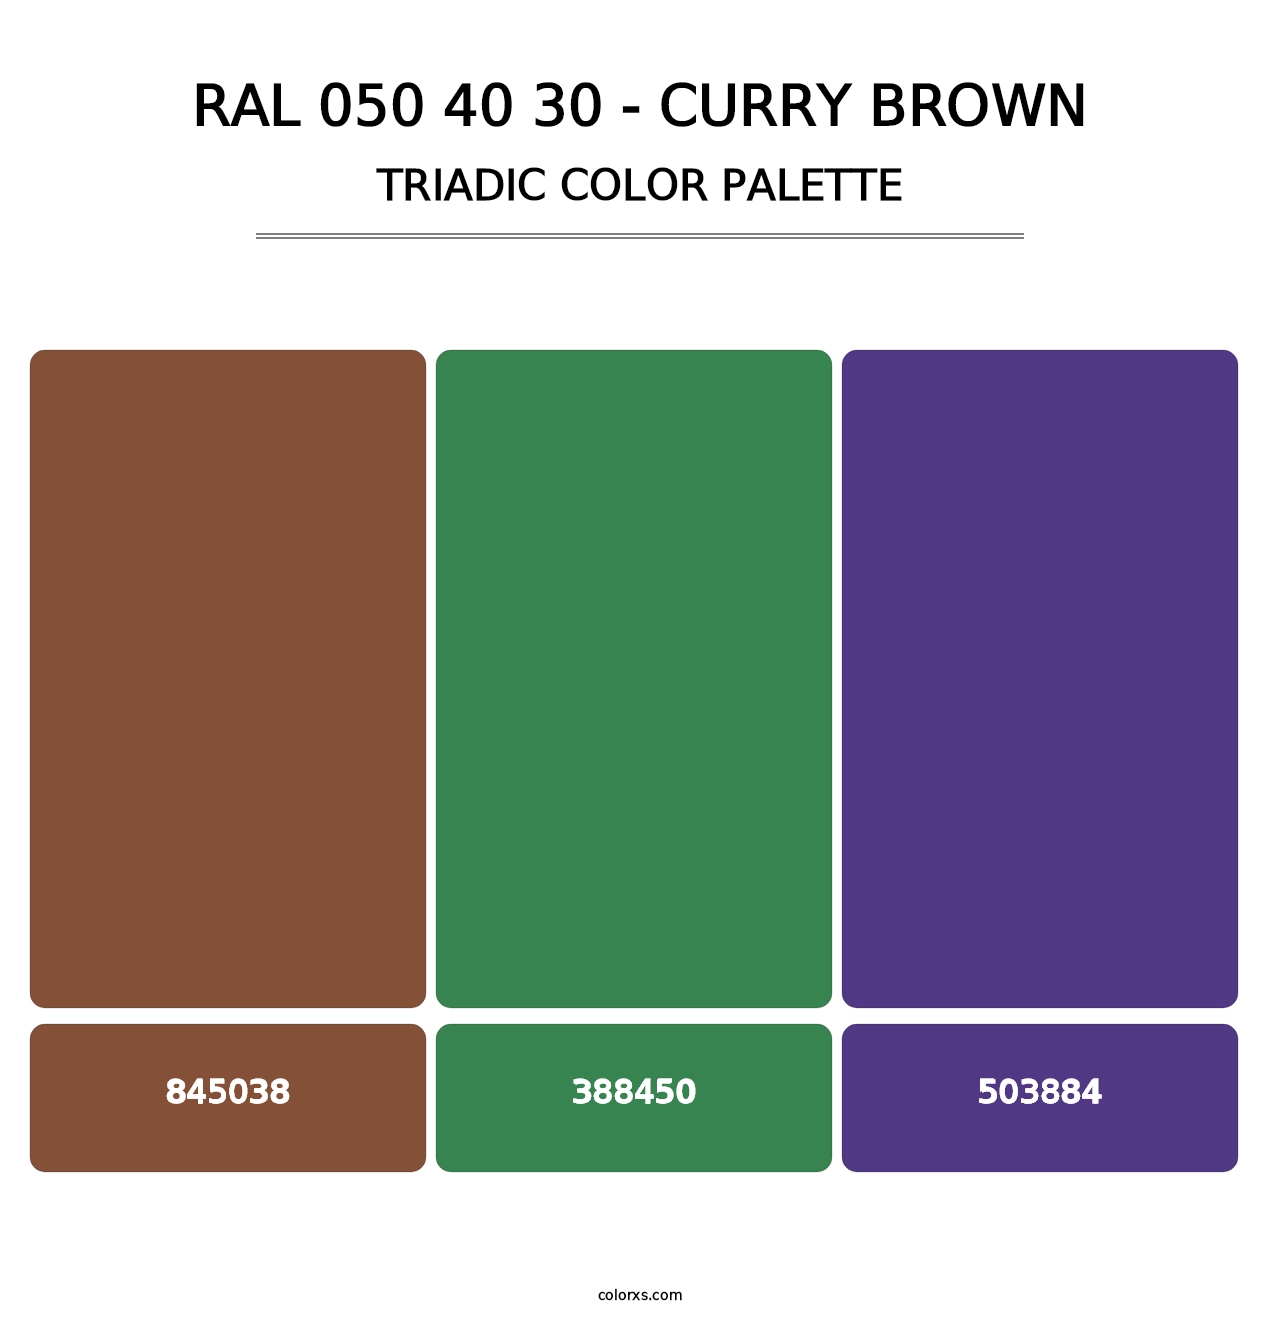 RAL 050 40 30 - Curry Brown - Triadic Color Palette